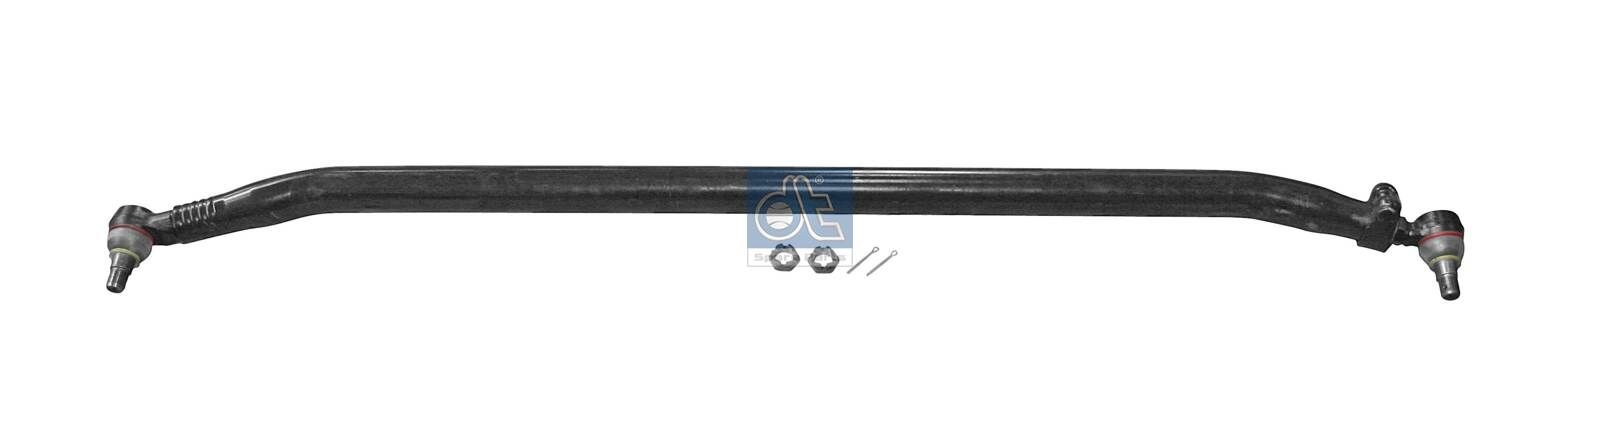 DT Spare Parts 6.53021 Rod Assembly 50 01 868 366